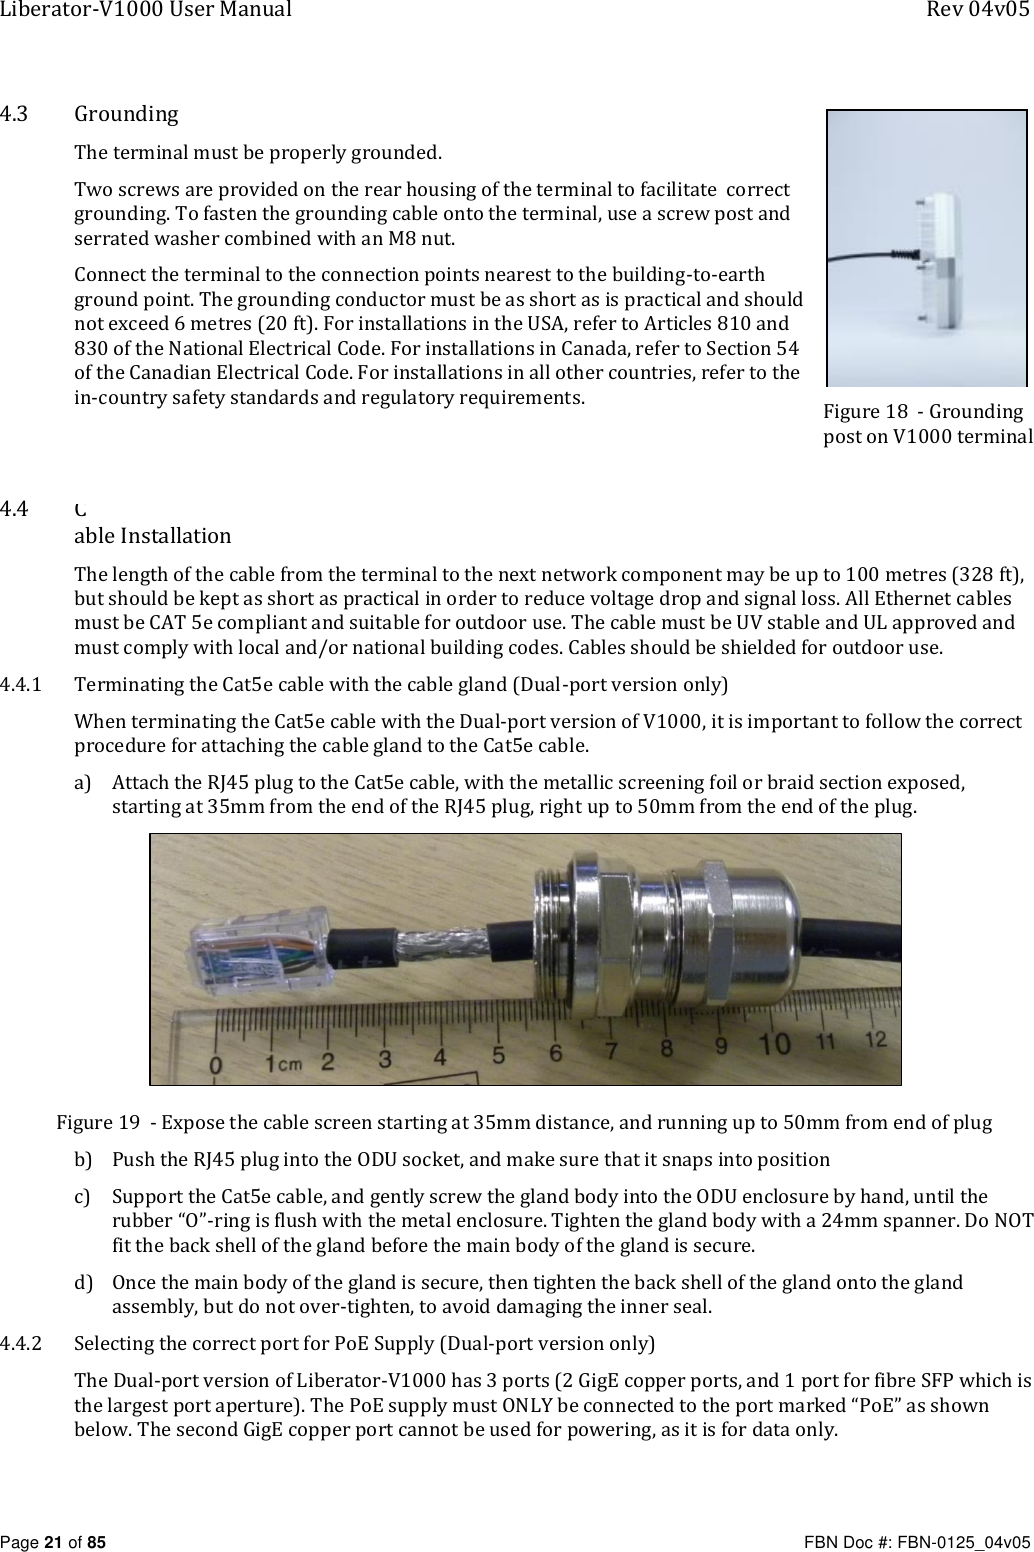 Liberator-V1000 User Manual  Rev 04v05     Page 21 of 85   FBN Doc #: FBN-0125_04v05 4.3 Grounding The terminal must be properly grounded. Two screws are provided on the rear housing of the terminal to facilitate  correct grounding. To fasten the grounding cable onto the terminal, use a screw post and serrated washer combined with an M8 nut. Connect the terminal to the connection points nearest to the building-to-earth ground point. The grounding conductor must be as short as is practical and should not exceed 6 metres (20 ft). For installations in the USA, refer to Articles 810 and 830 of the National Electrical Code. For installations in Canada, refer to Section 54 of the Canadian Electrical Code. For installations in all other countries, refer to the in-country safety standards and regulatory requirements.   4.4 Cable Installation The length of the cable from the terminal to the next network component may be up to 100 metres (328 ft), but should be kept as short as practical in order to reduce voltage drop and signal loss. All Ethernet cables must be CAT 5e compliant and suitable for outdoor use. The cable must be UV stable and UL approved and must comply with local and/or national building codes. Cables should be shielded for outdoor use. 4.4.1 Terminating the Cat5e cable with the cable gland (Dual-port version only) When terminating the Cat5e cable with the Dual-port version of V1000, it is important to follow the correct procedure for attaching the cable gland to the Cat5e cable. a) Attach the RJ45 plug to the Cat5e cable, with the metallic screening foil or braid section exposed, starting at 35mm from the end of the RJ45 plug, right up to 50mm from the end of the plug.  Figure 19  - Expose the cable screen starting at 35mm distance, and running up to 50mm from end of plug b) Push the RJ45 plug into the ODU socket, and make sure that it snaps into position c) Support the Cat5e cable, and gently screw the gland body into the ODU enclosure by hand, until the rubber “O”-ring is flush with the metal enclosure. Tighten the gland body with a 24mm spanner. Do NOT fit the back shell of the gland before the main body of the gland is secure. d) Once the main body of the gland is secure, then tighten the back shell of the gland onto the gland assembly, but do not over-tighten, to avoid damaging the inner seal. 4.4.2 Selecting the correct port for PoE Supply (Dual-port version only) The Dual-port version of Liberator-V1000 has 3 ports (2 GigE copper ports, and 1 port for fibre SFP which is the largest port aperture). The PoE supply must ONLY be connected to the port marked “PoE” as shown below. The second GigE copper port cannot be used for powering, as it is for data only. Figure 18  - Grounding post on V1000 terminal  